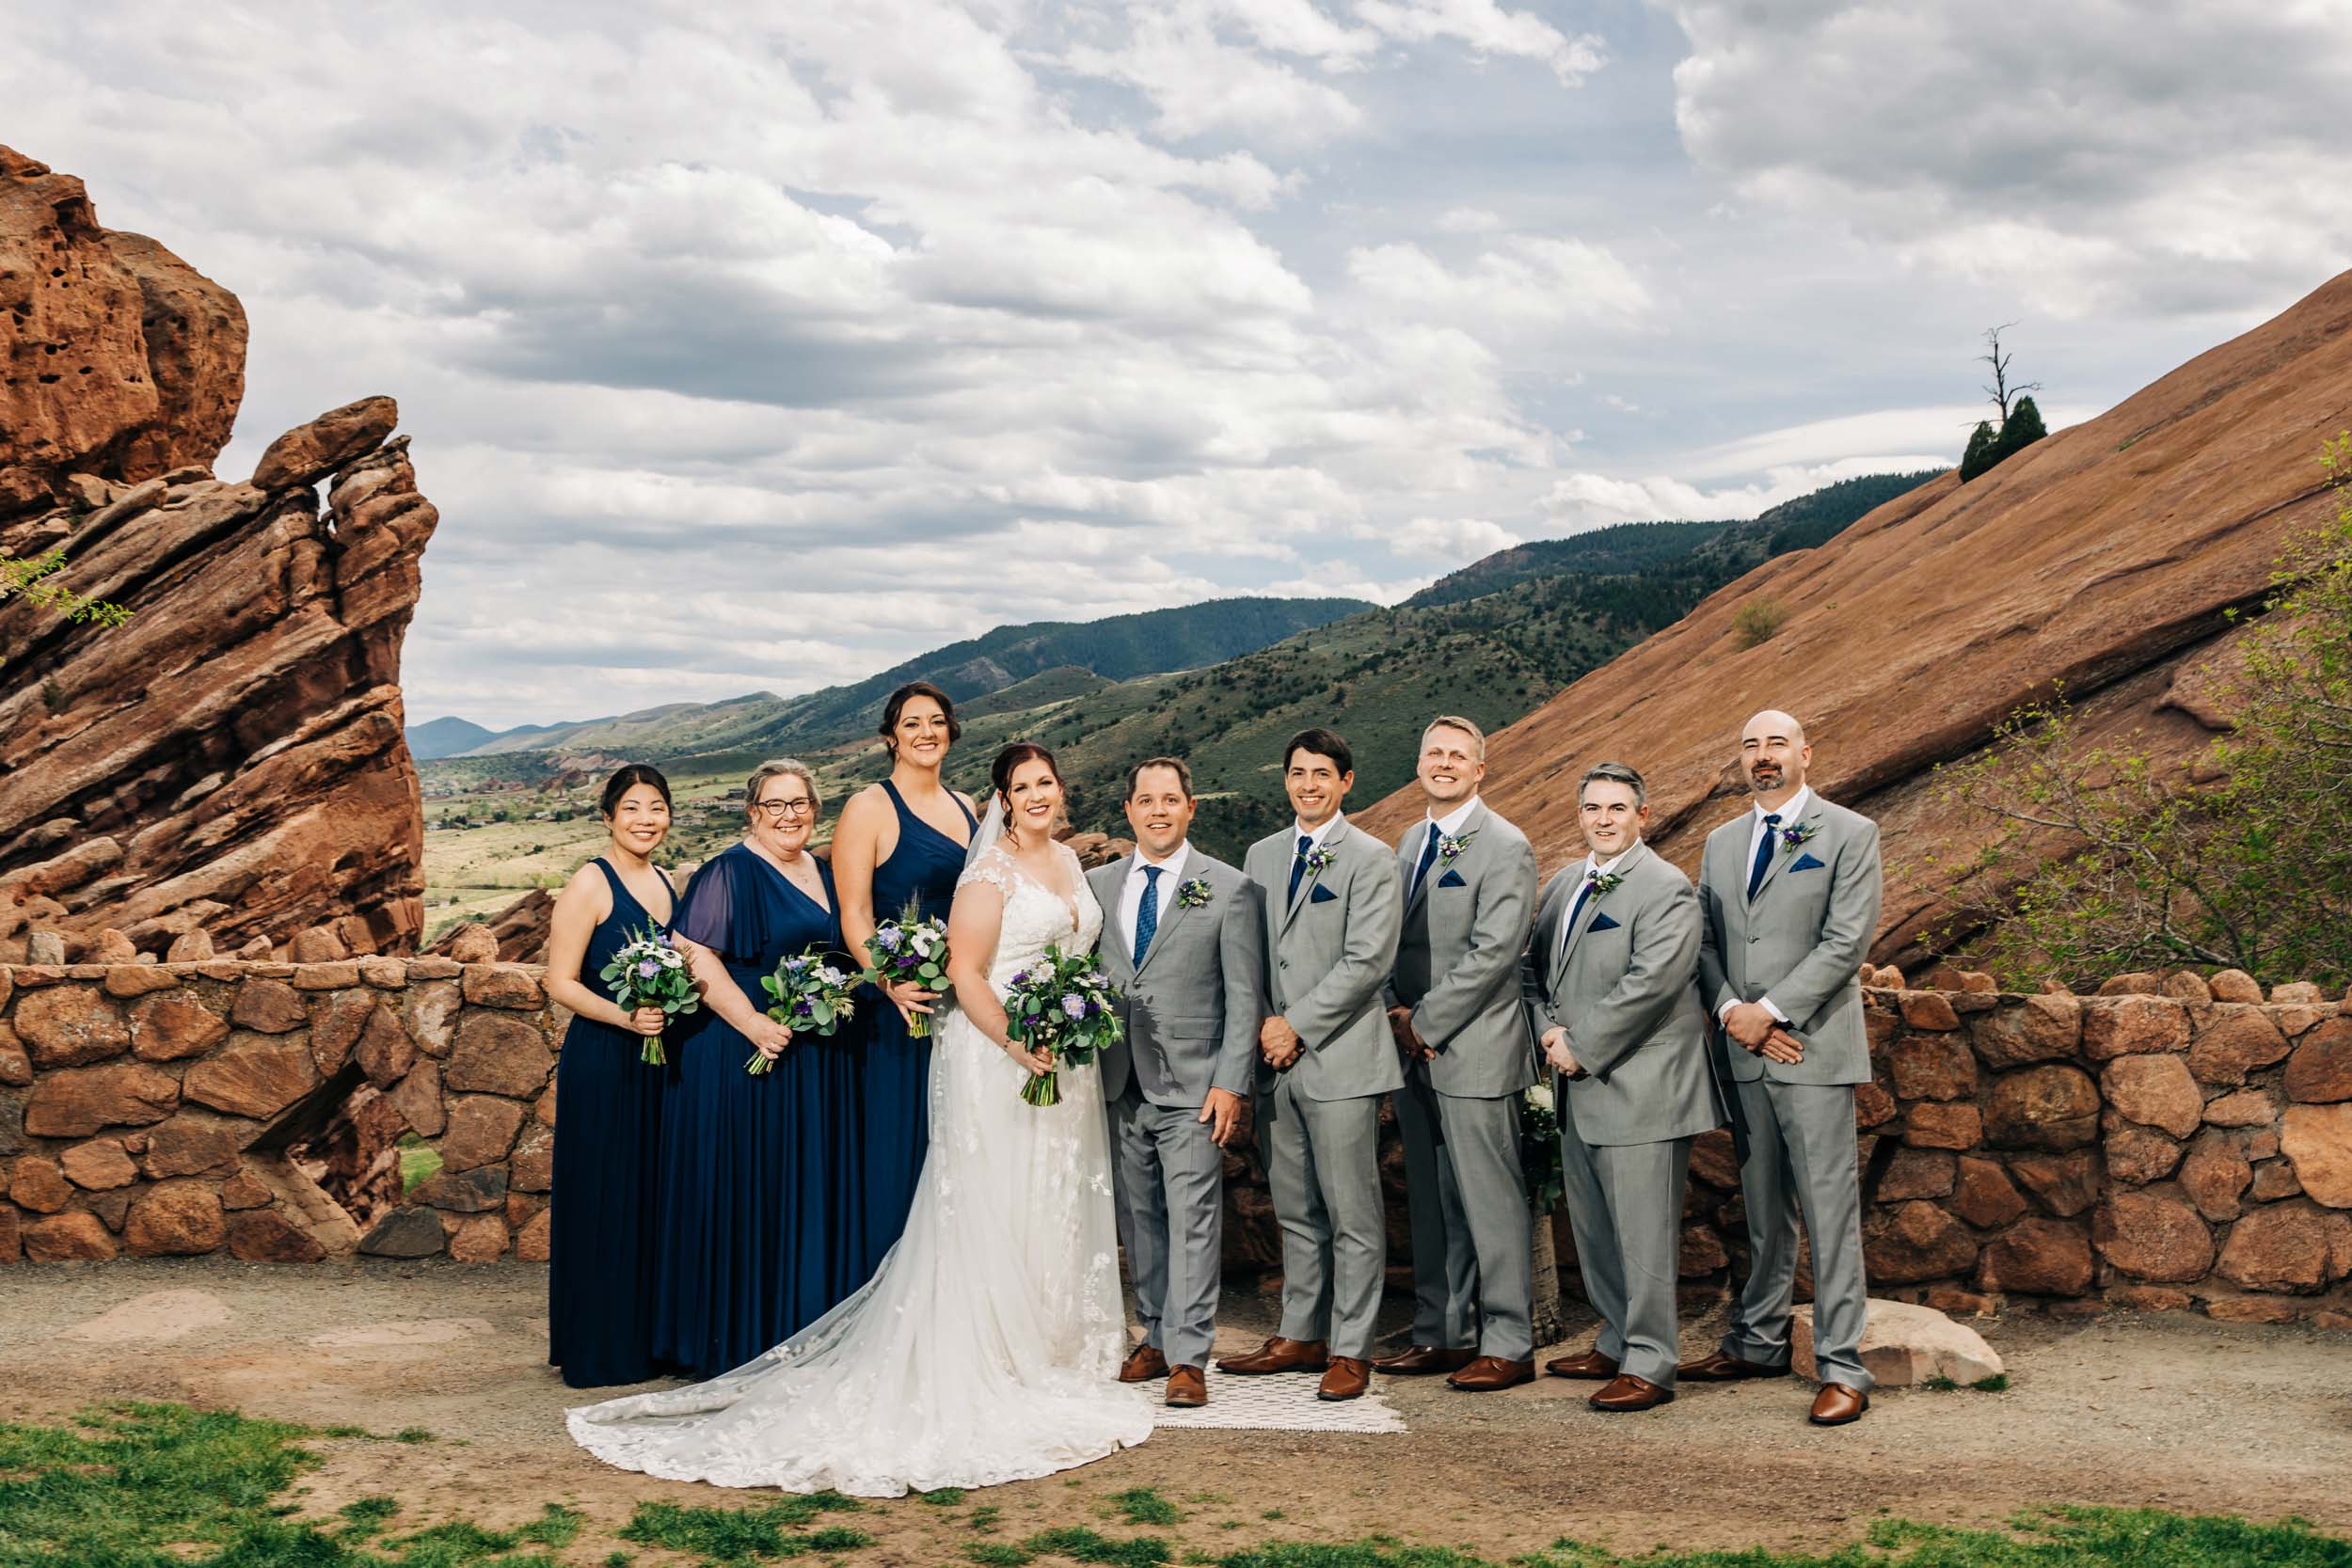 wedding party photos at red rocks trading post wedding